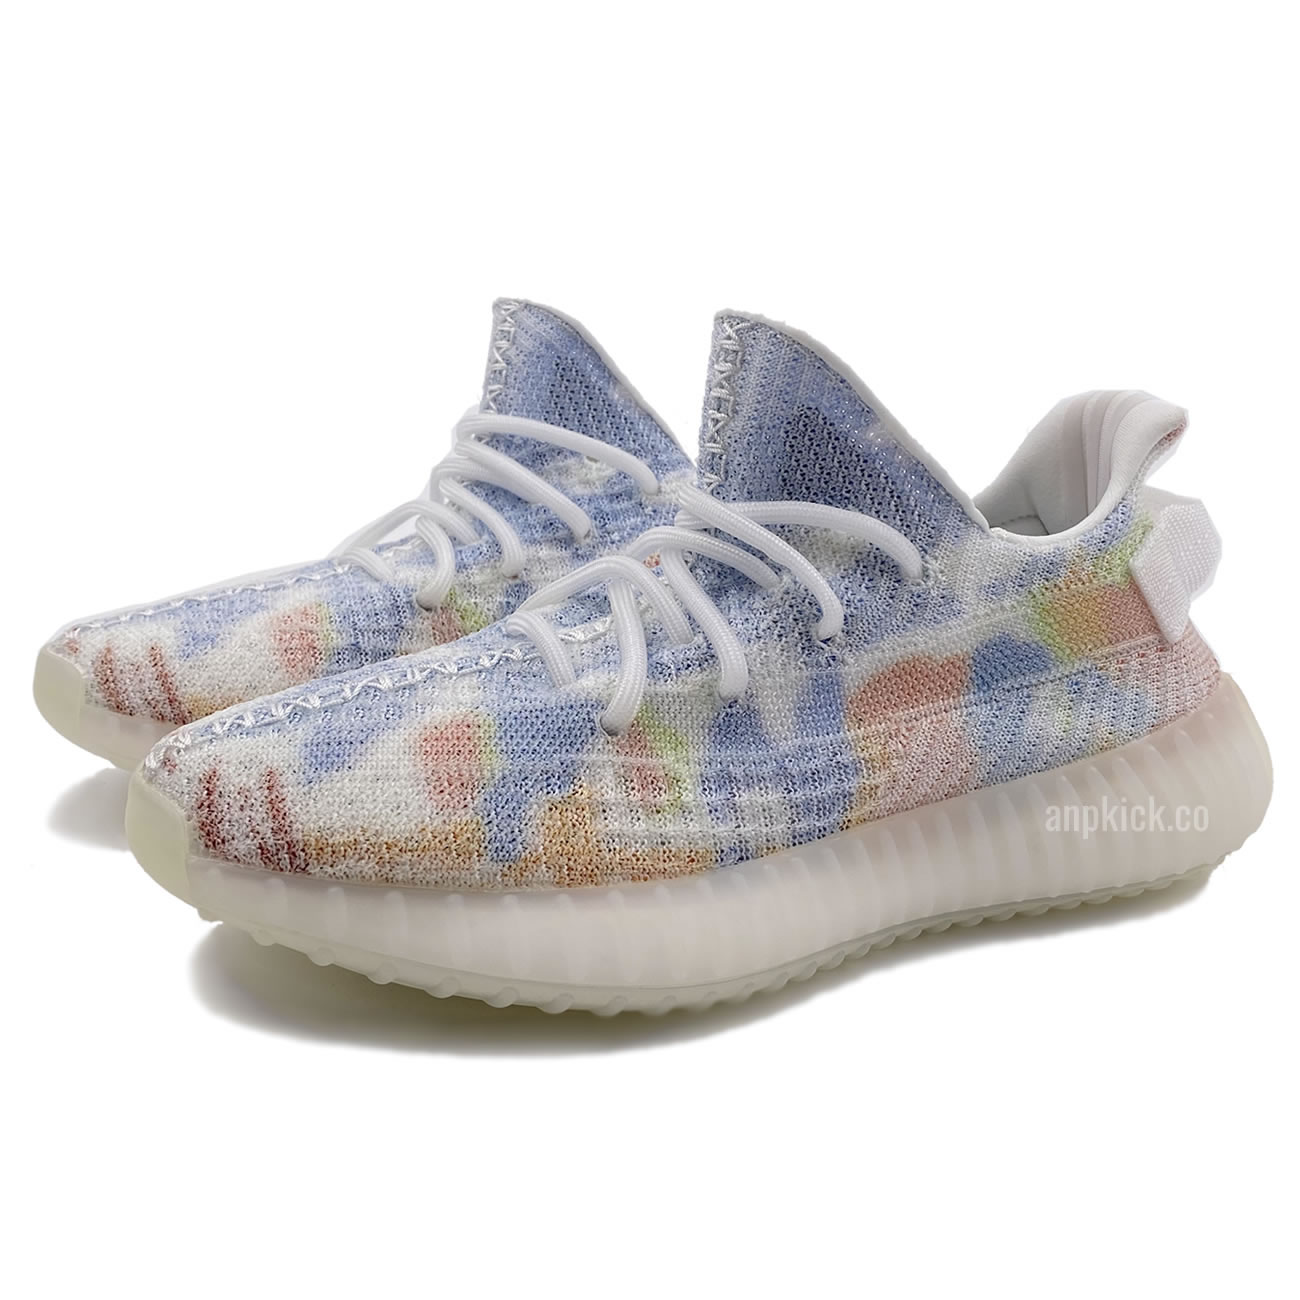 New Custom Yeezy Boost 350 V2 Colorful For Sale (3) - newkick.org